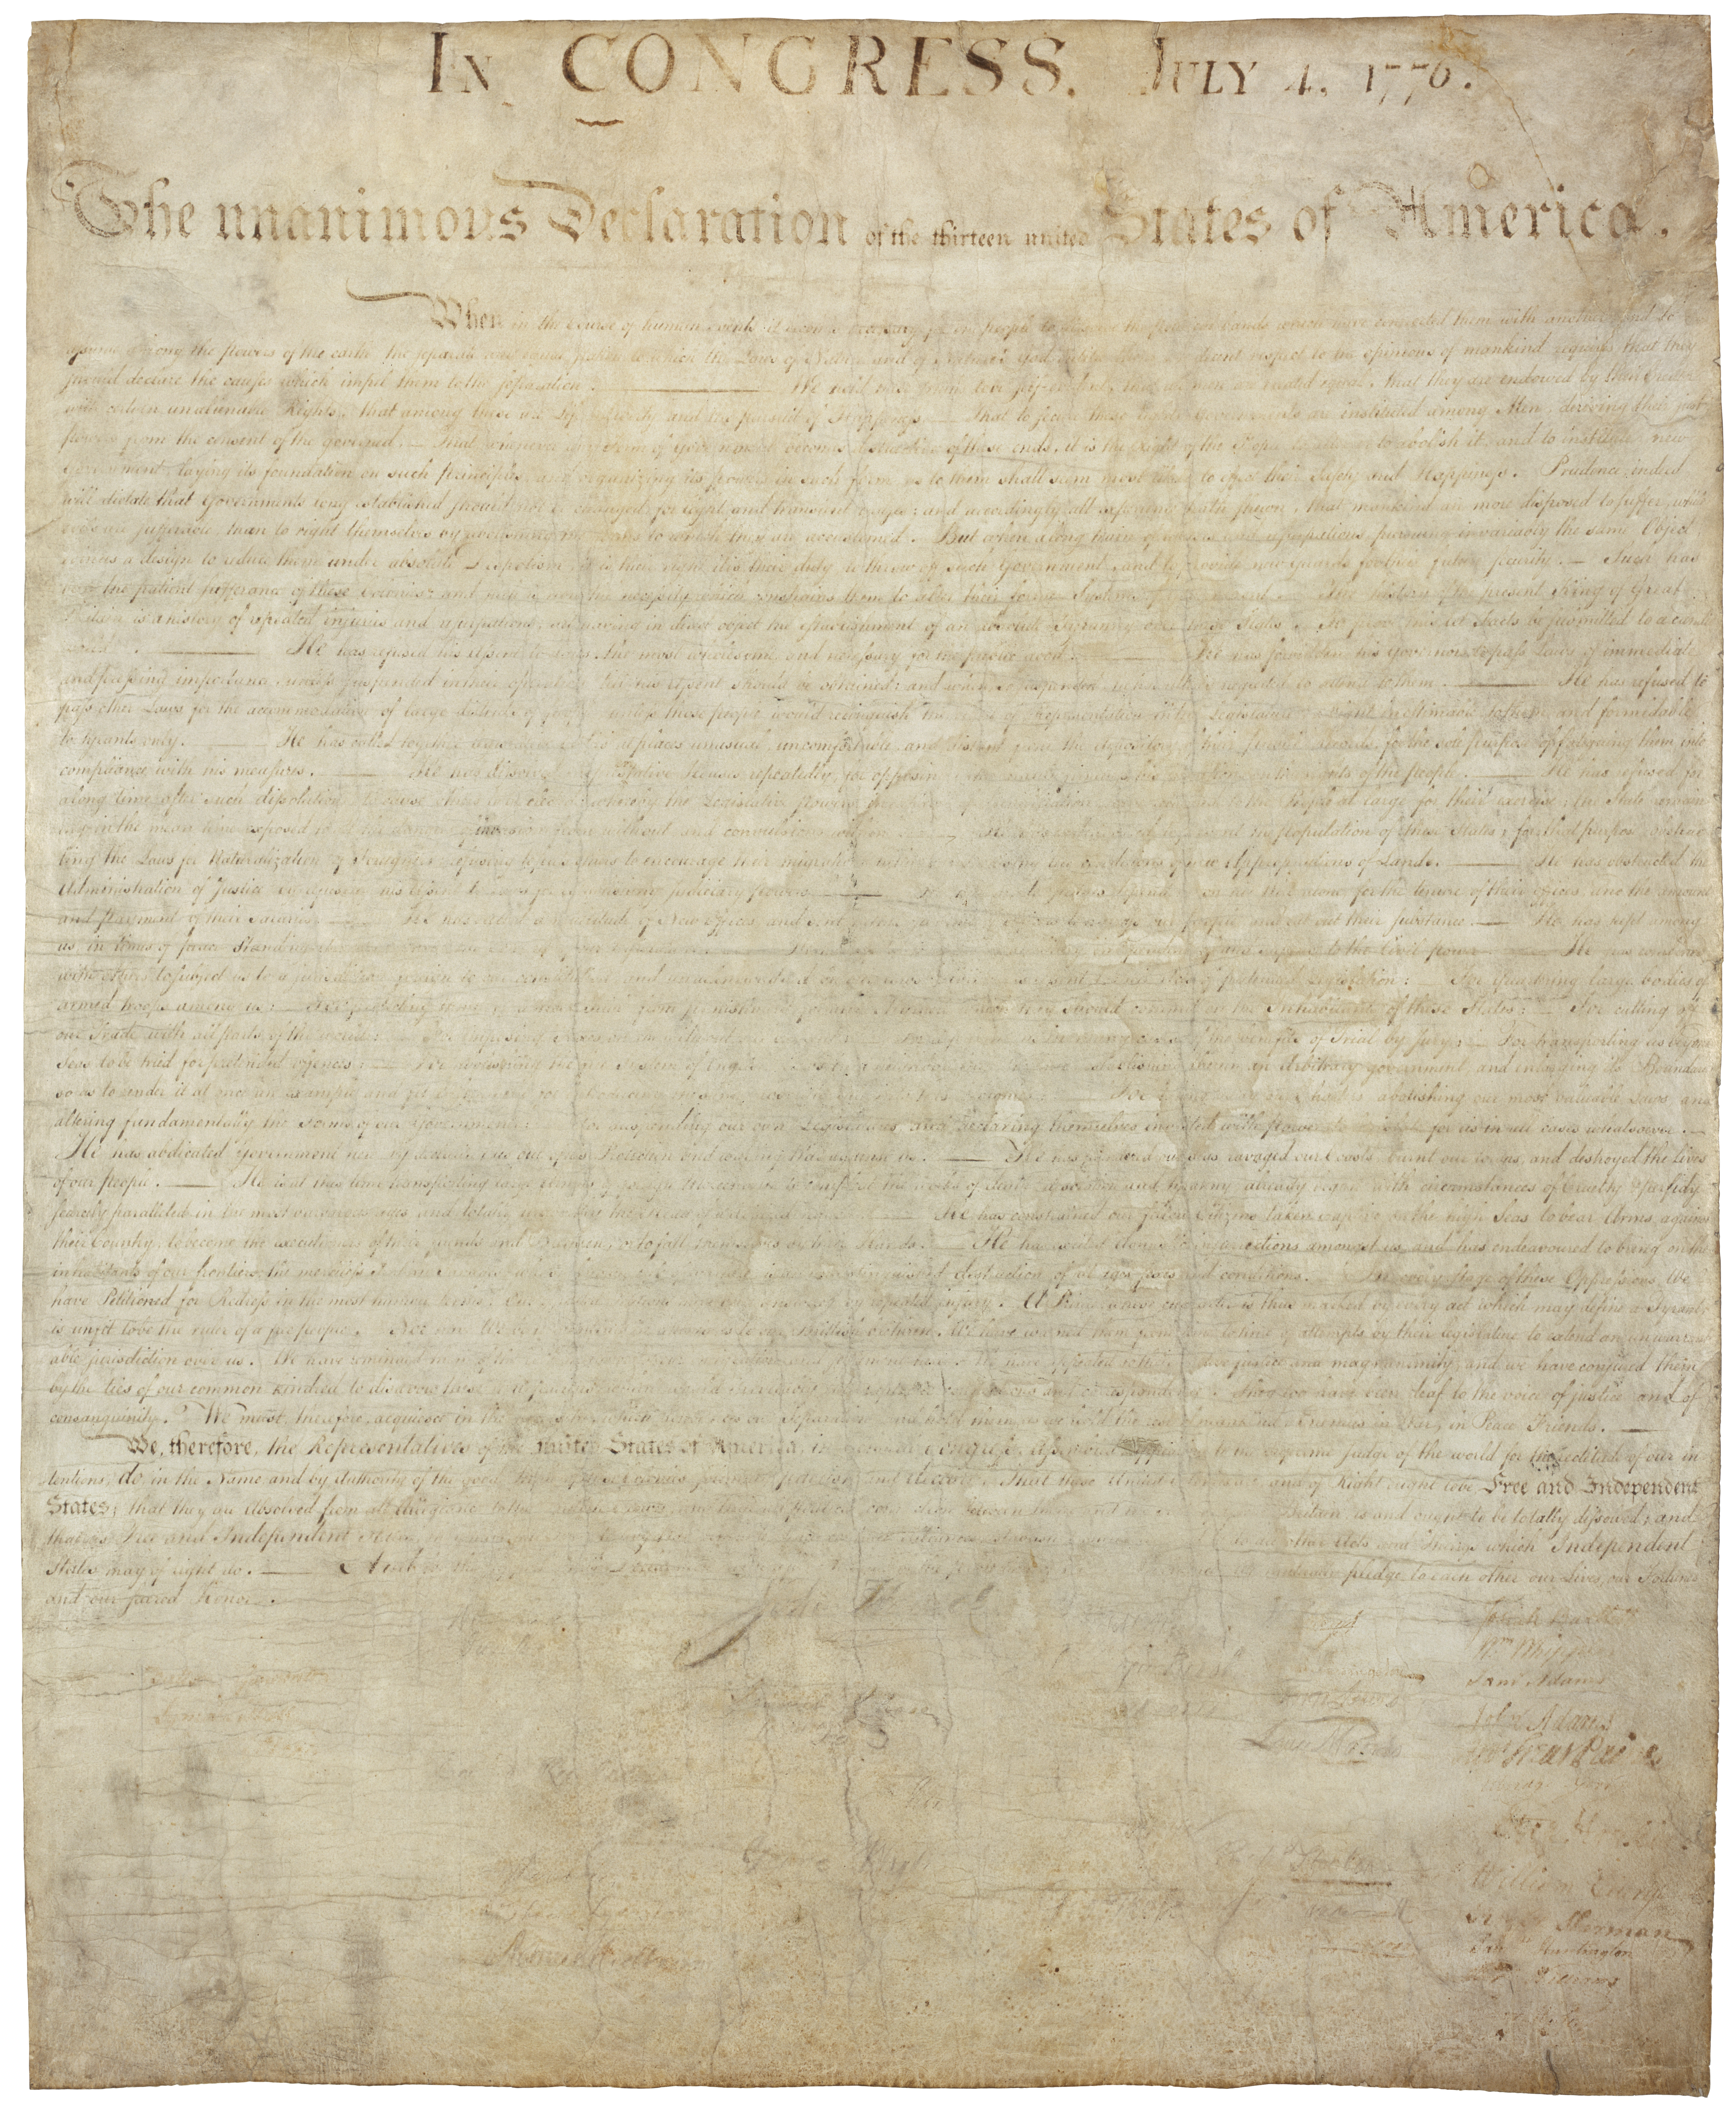 Physical History Of The United States Declaration Of Independence - Free Printable Copy Of The Declaration Of Independence